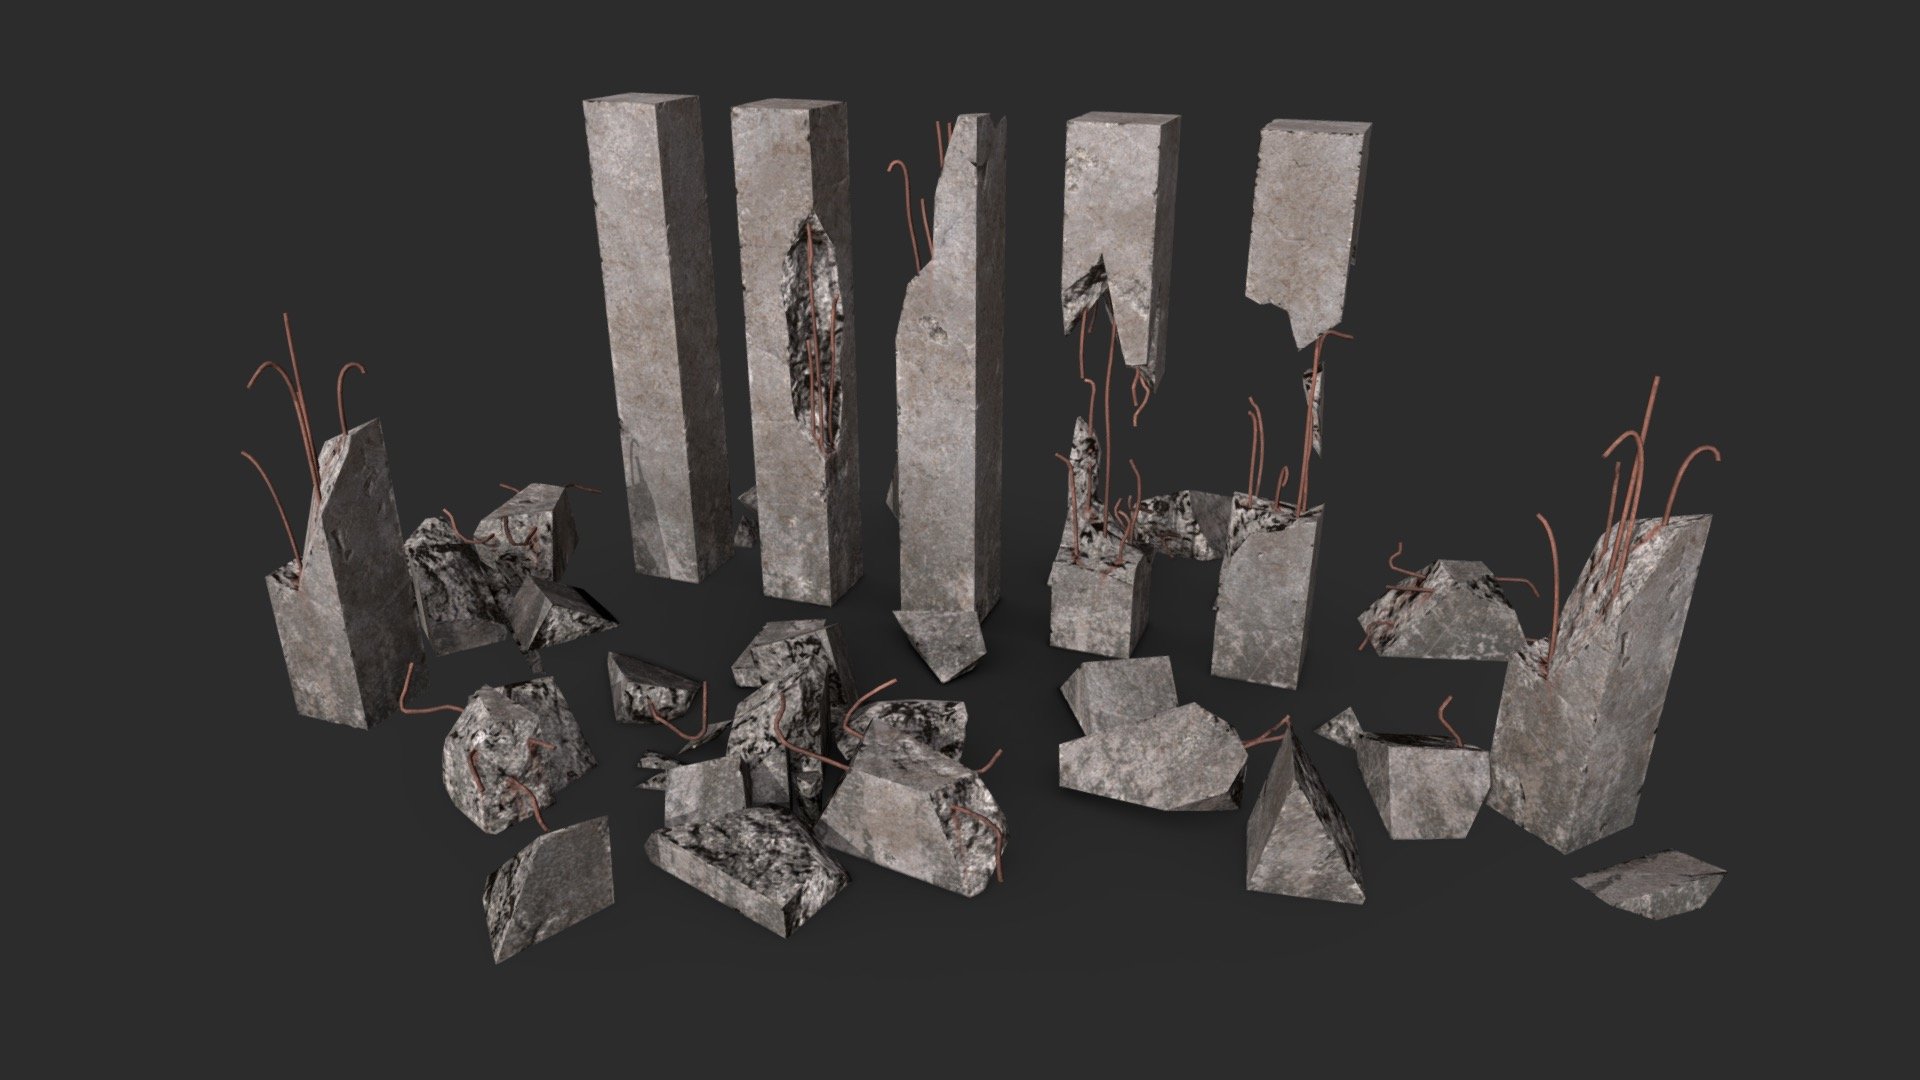 This old concrete pillars pack including 11 individual objects with 3 or 2 LODs each and colliders. All elements are in realistic style and can be assembled to be used in any game (post-apo, first person shooter, construction… ). All objects share a total of 2 materials for the best optimization for games.

This AAA game asset of concrete pillars will embellish you scene and add more details which can help the gameplay and the game-design.

The material of models is unique and ready for PBR.

Low-poly model &amp; Blender native 2.93

SPECIFICATIONS

Objects : 11
Polygons : 4695
Subdivision ready : No
Render engine : Eevee (Cycles ready)

GAME SPECS

LODs : Yes (inside FBX for Unity &amp; Unreal)
Numbers of LODs : 3 or 2
Collider : Yes
Lightmap UV : No

EXPORTED FORMATS

FBX
Collada
OBJ

TEXTURES

Materials in scene : 2
Textures sizes : 4K
Textures types : Base Color, Metallic, Roughness, Normal (DirectX &amp; OpenGL), Heigh &amp; AO (also Unity &amp; Unreal workflow maps)
Textures format : PNG - Broken Concrete Pillars Pack - Buy Royalty Free 3D model by KangaroOz 3D (@KangaroOz-3D) 3d model